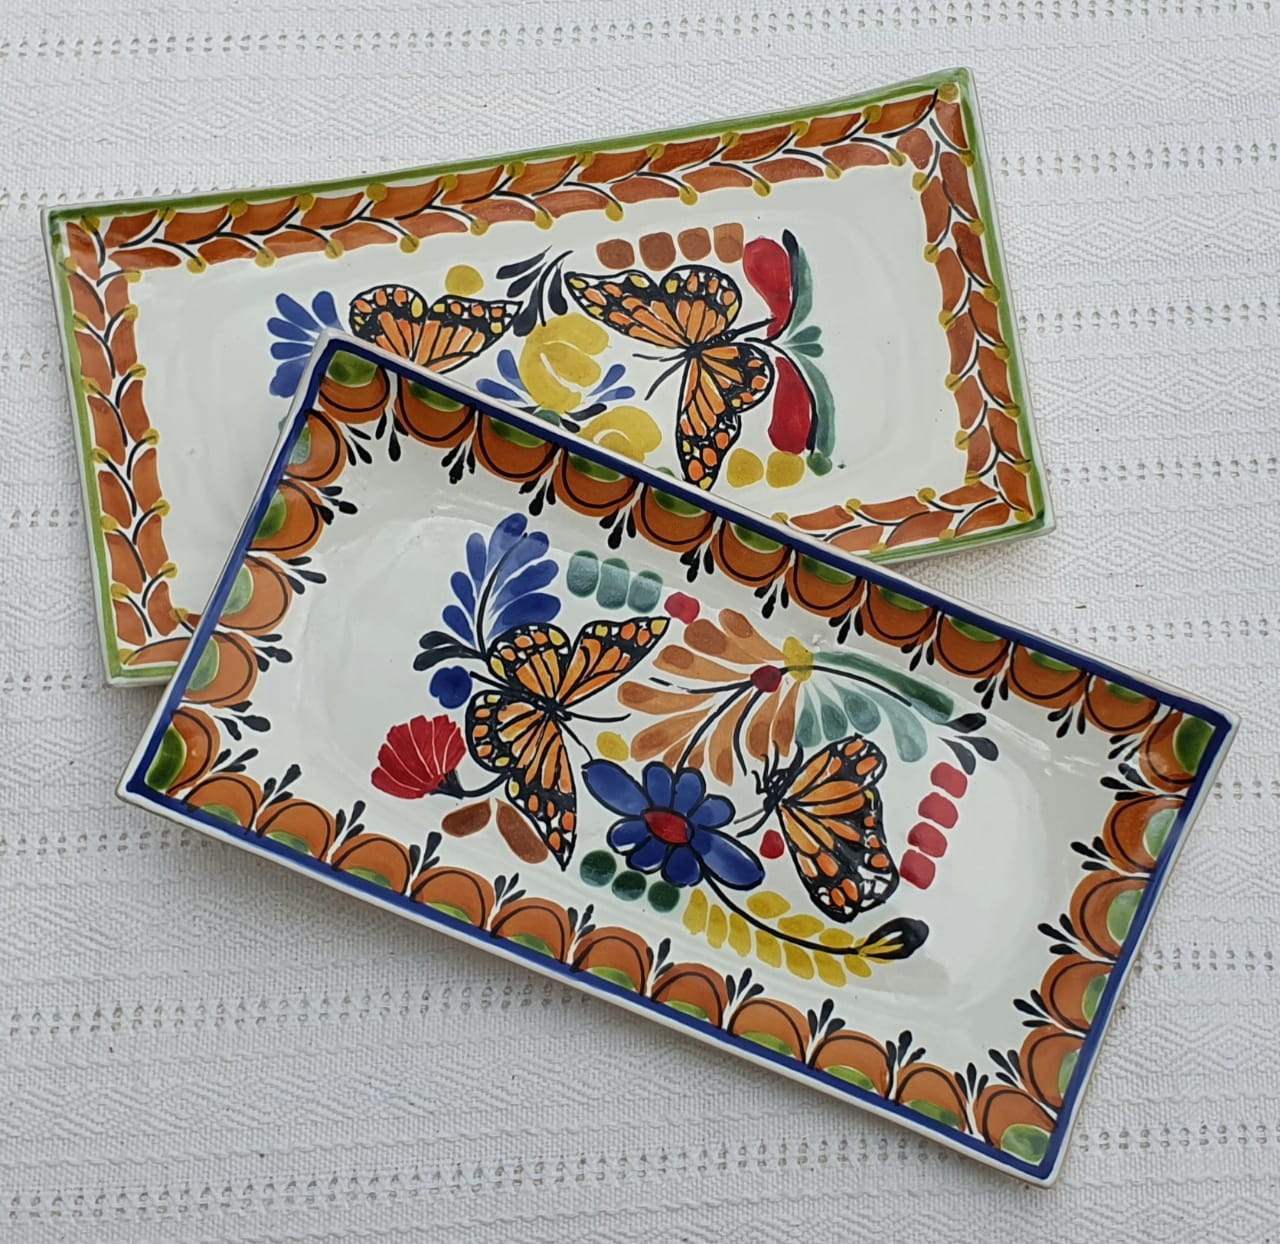 Butterfly Rectangular Plate / Tray Set of 2(Pieces) Multicolors